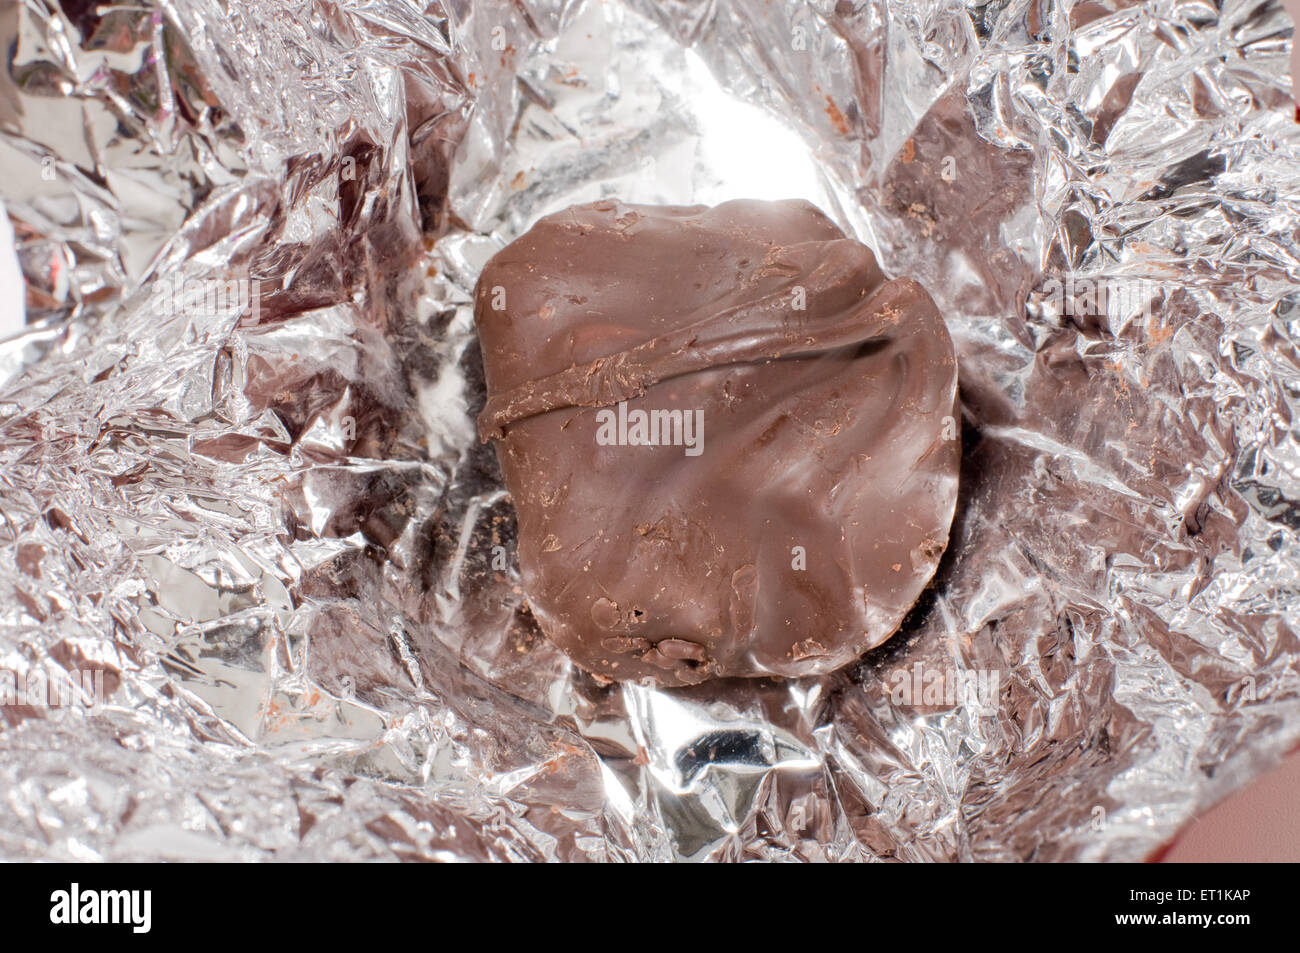 Chocolate wrapped wrapping paper Stock Photo